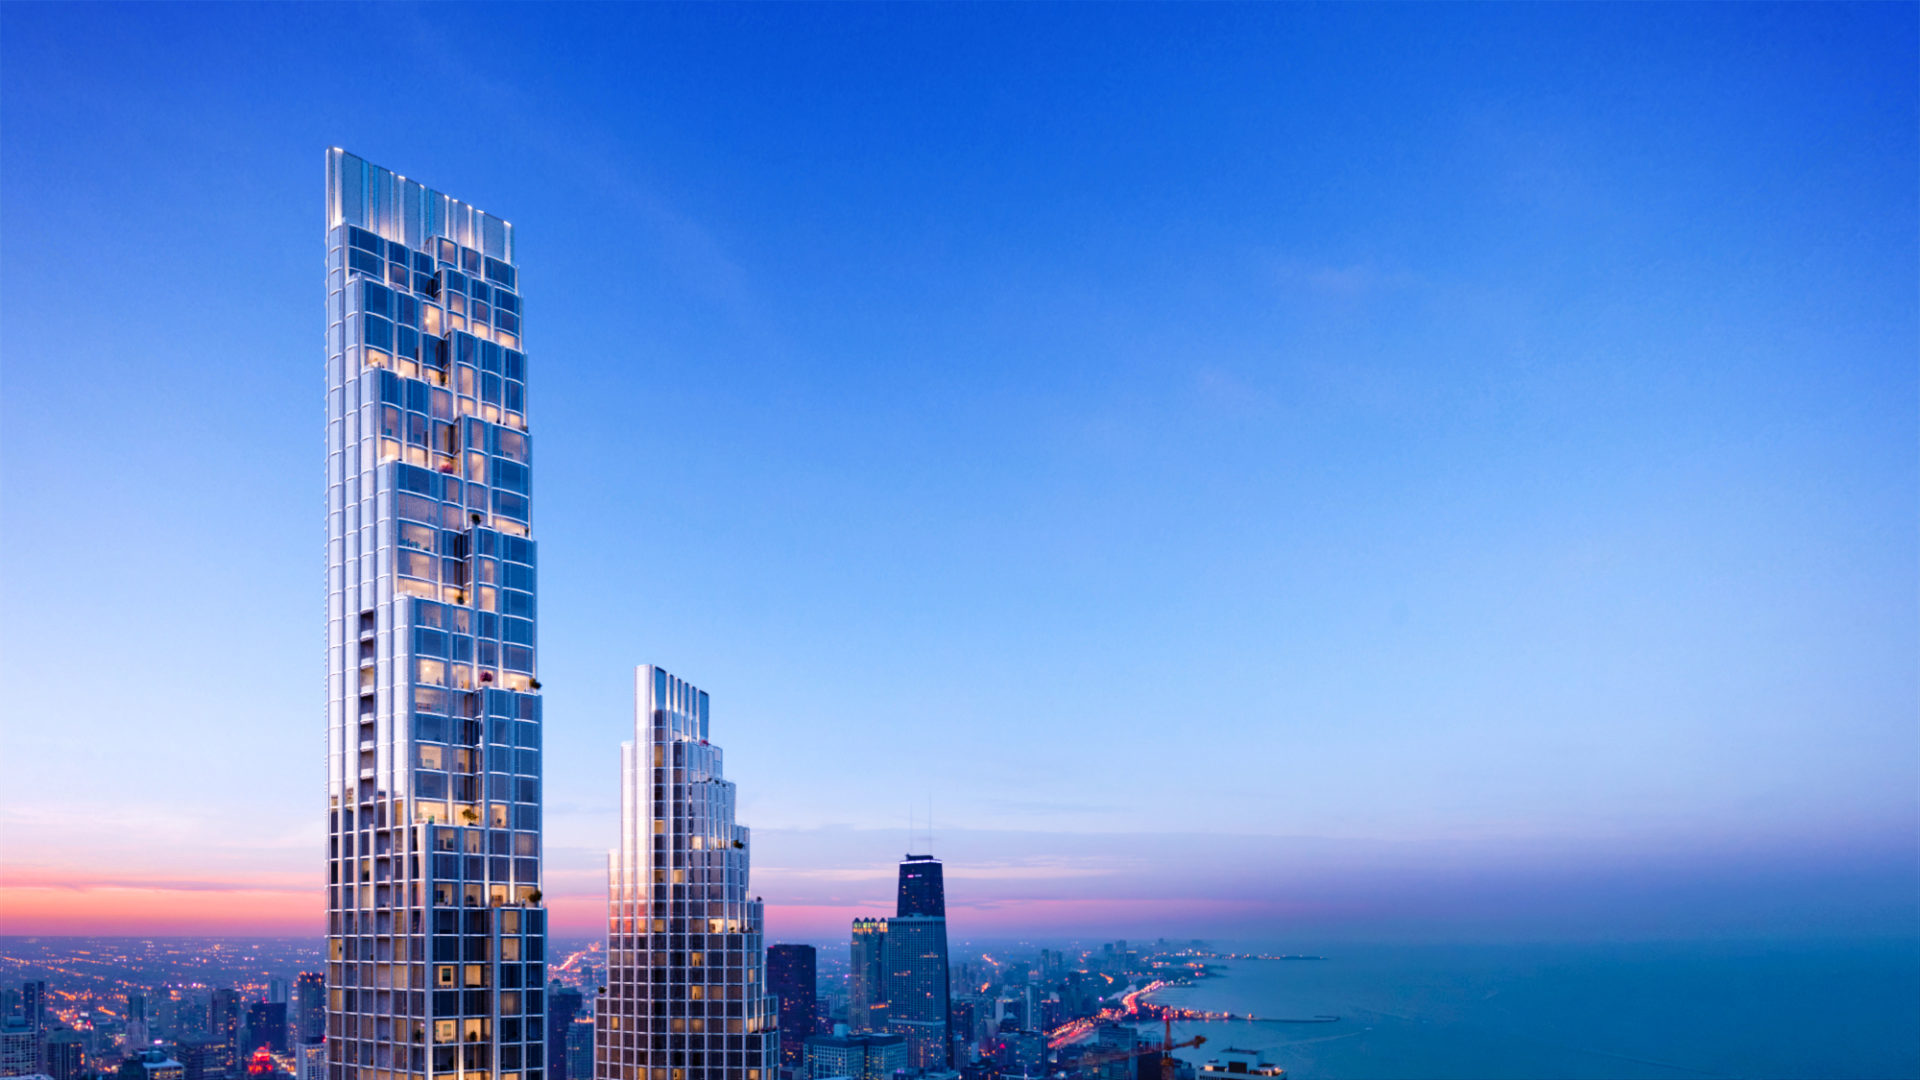 Related Midwest plans two towers at 400 North Lake Shore Drive